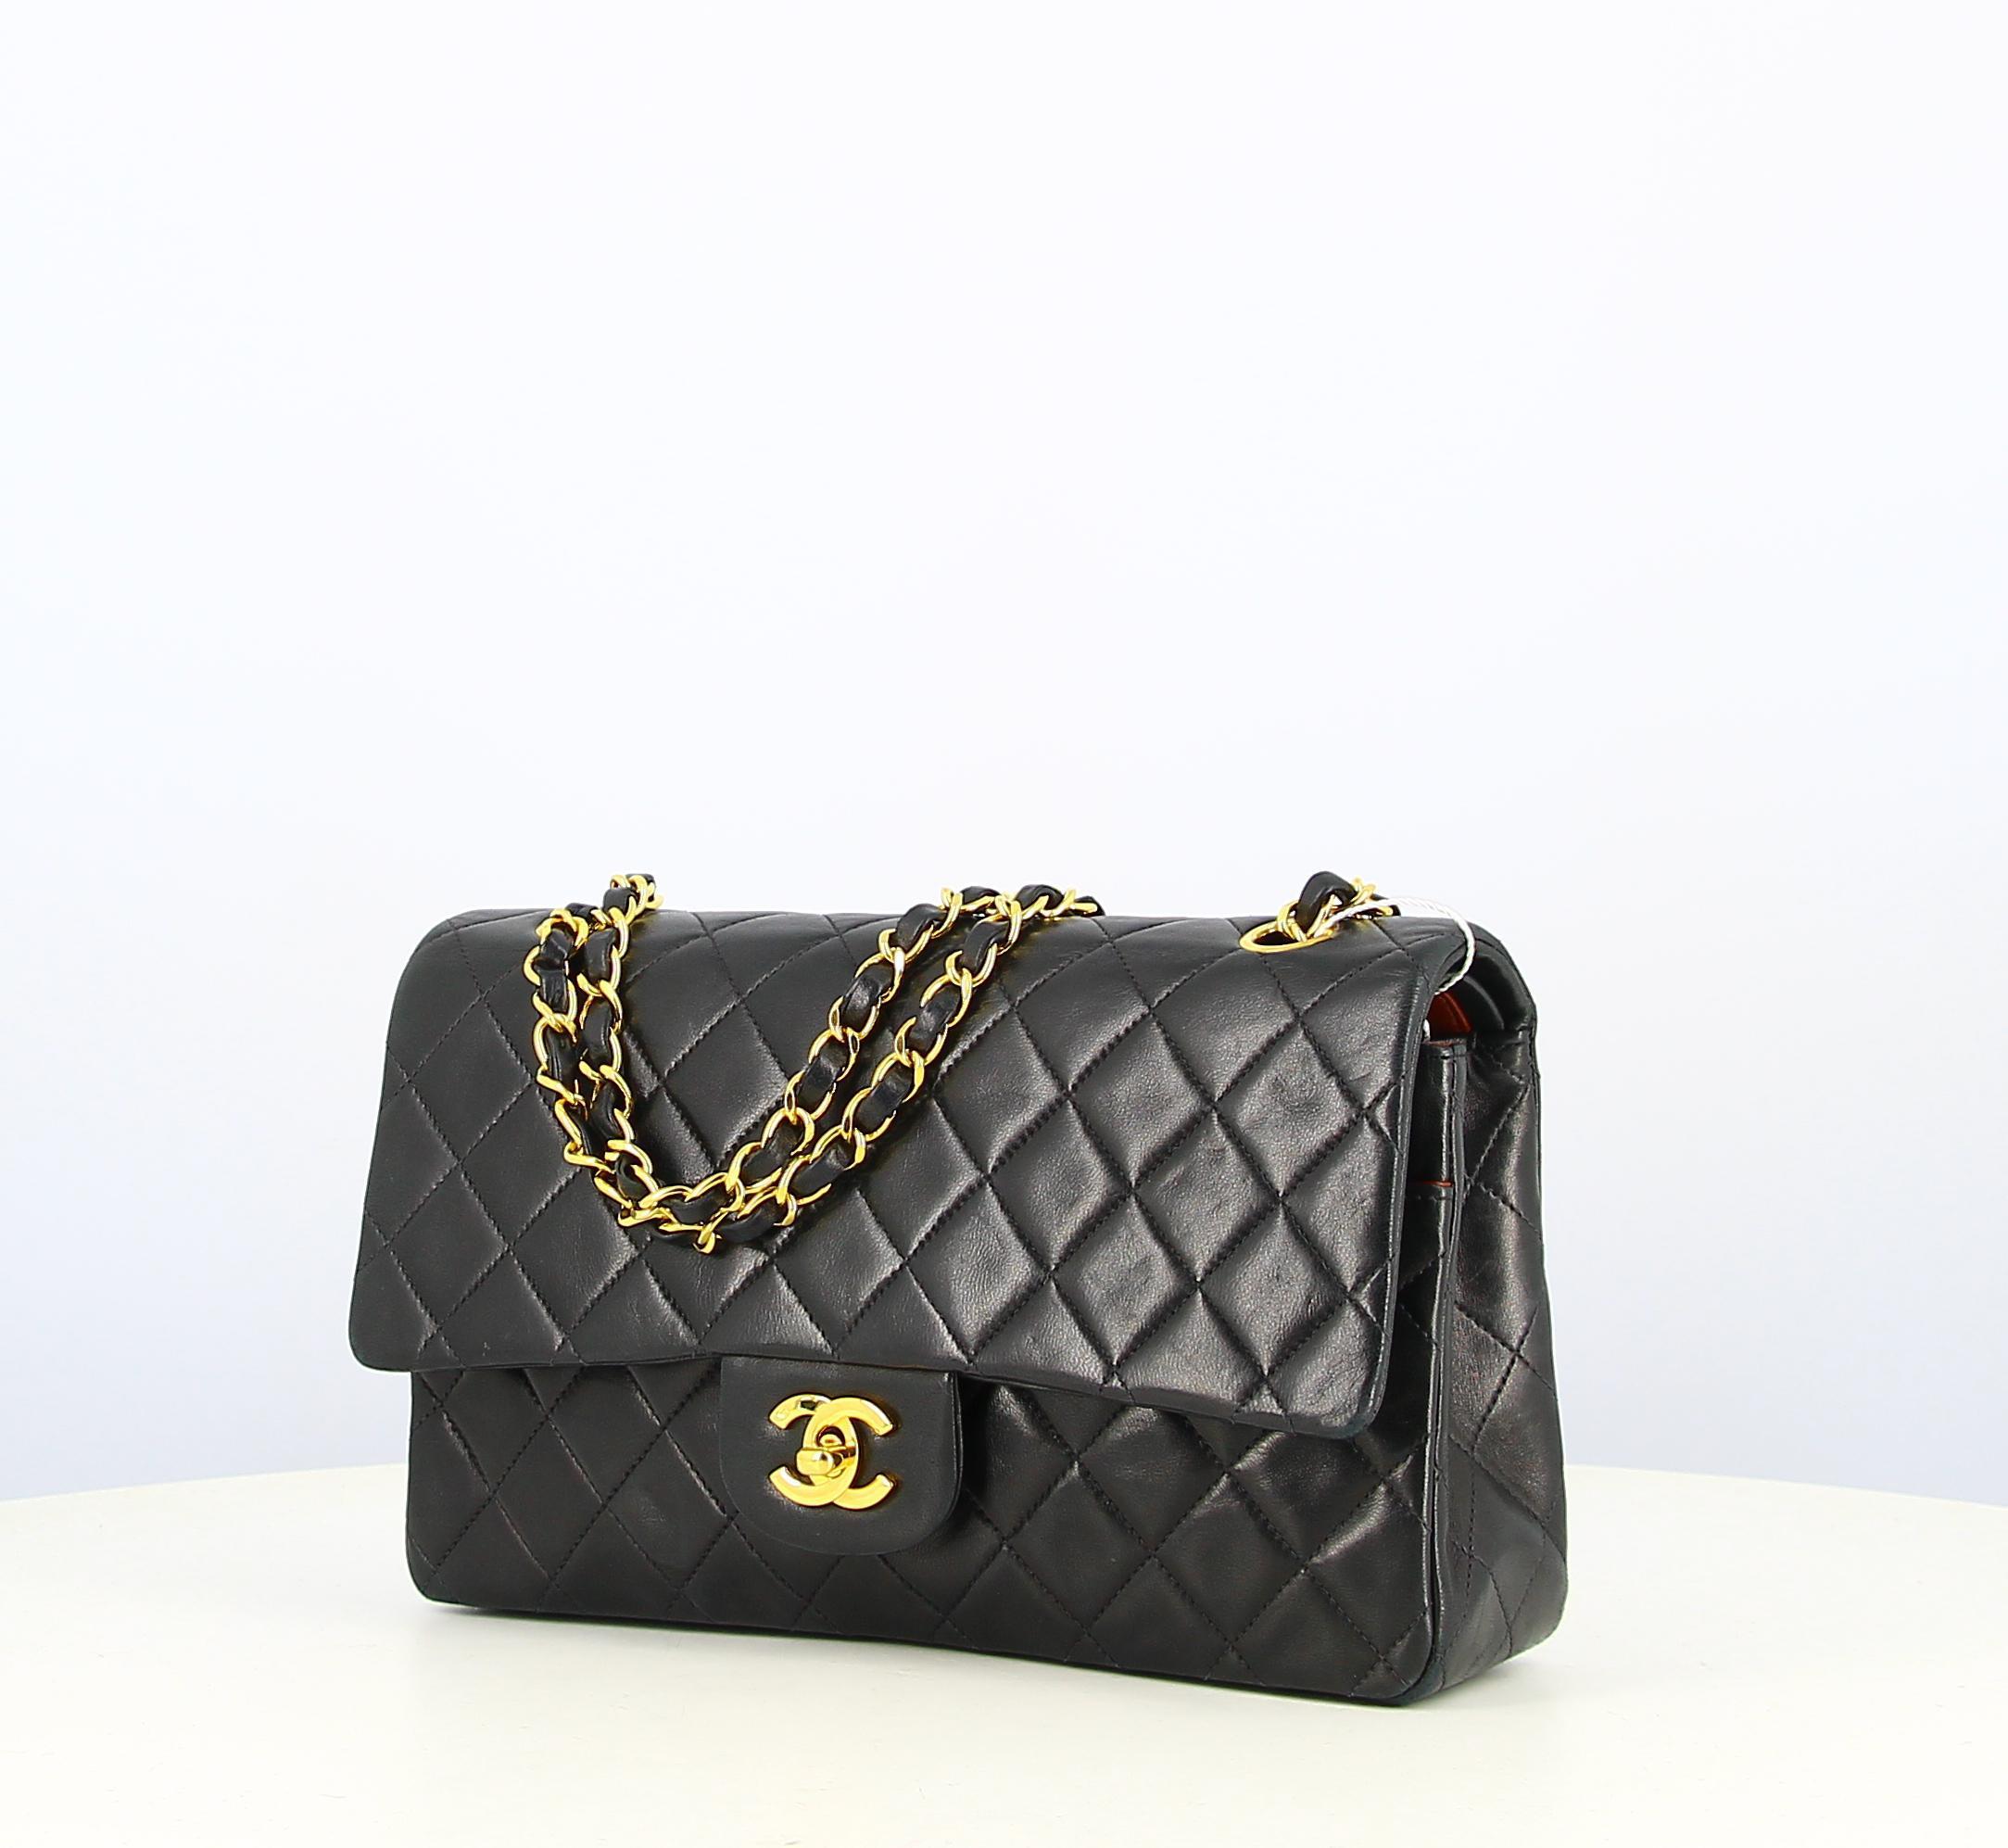 1991-1993 Chanel Timeless Black Quilted Leather Bag
- Good condition, shows slight wear and tear over time
- Chanel Timeless Black Handbag, in quilted leather, long adjustable chain, worn on the shoulder or across the chest. Double C golden clasp,